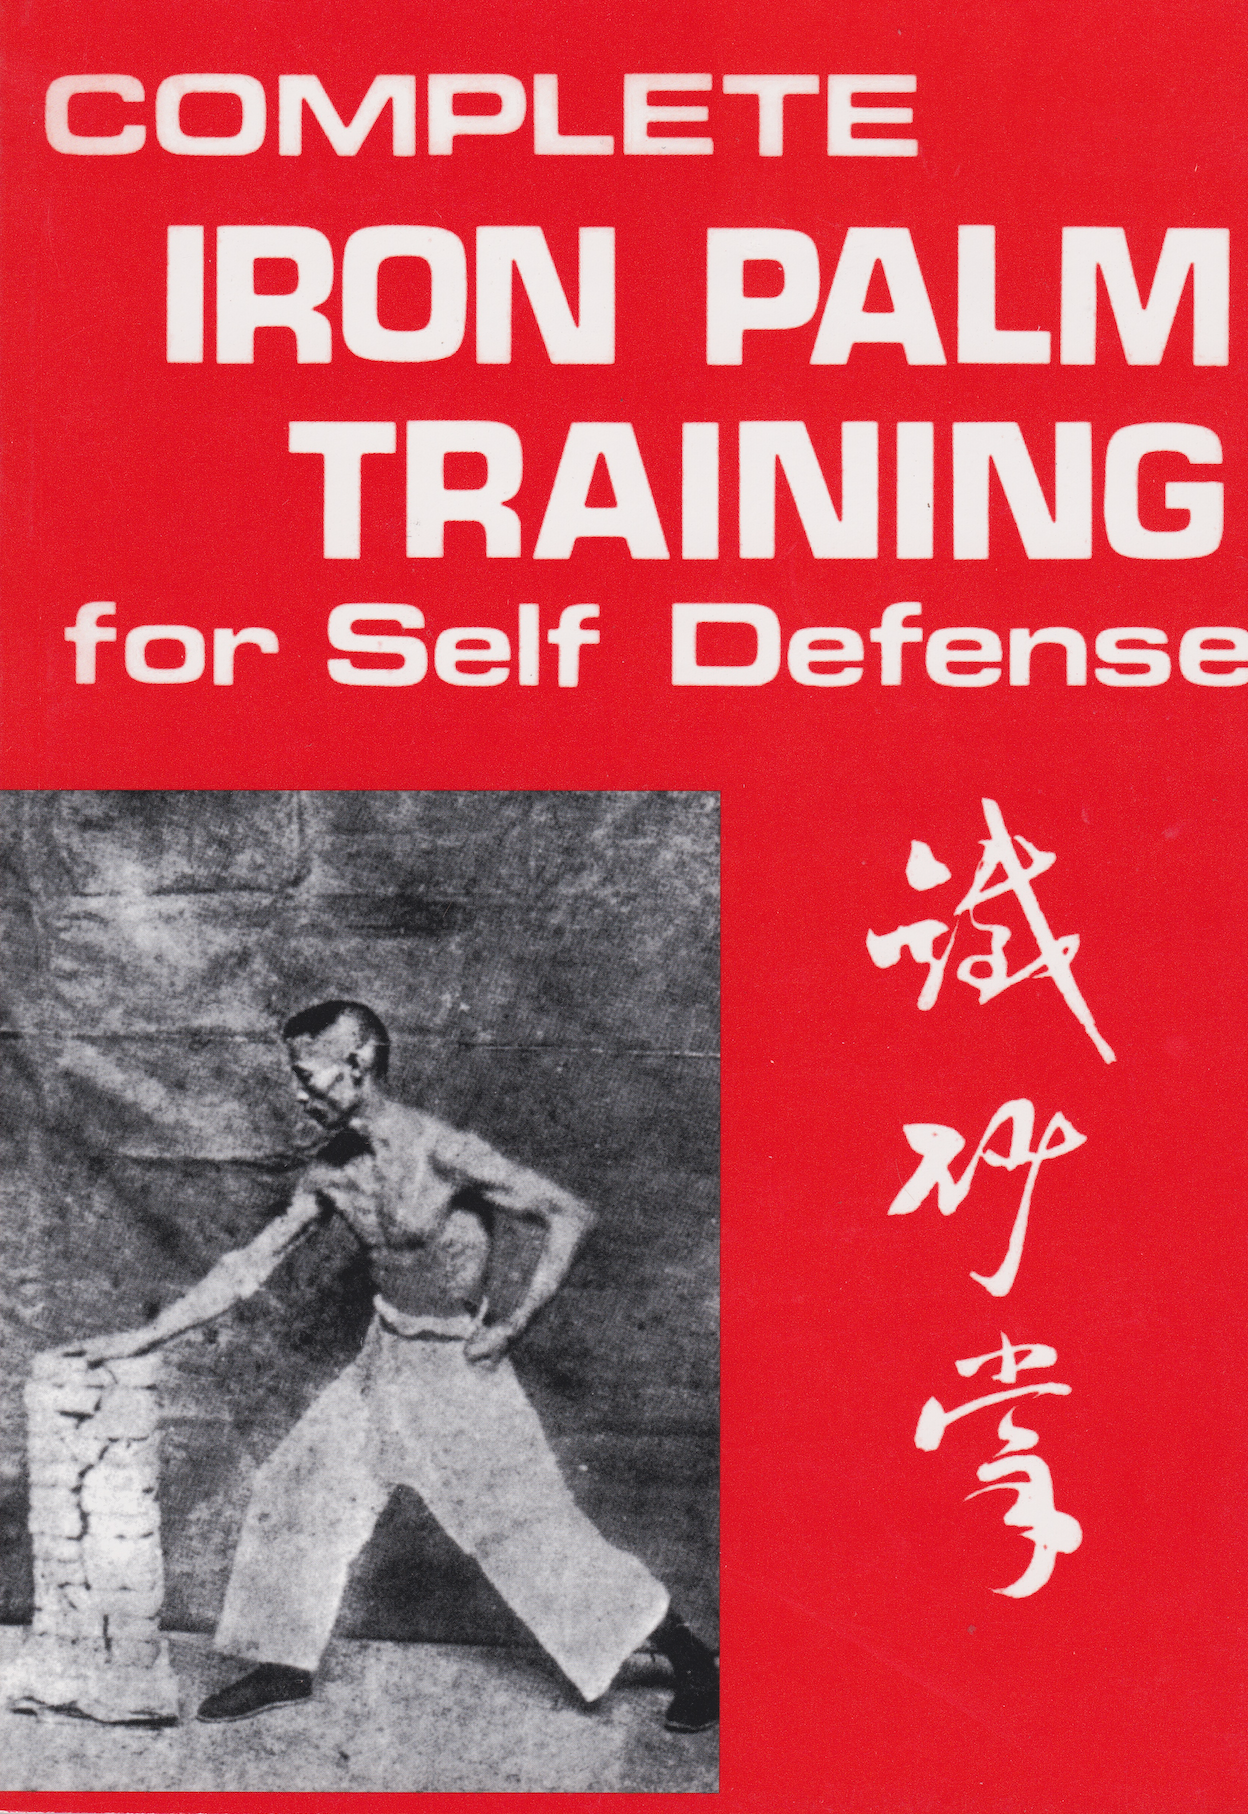 Complete Iron Palm Training for Self Defense Book by H C Chao